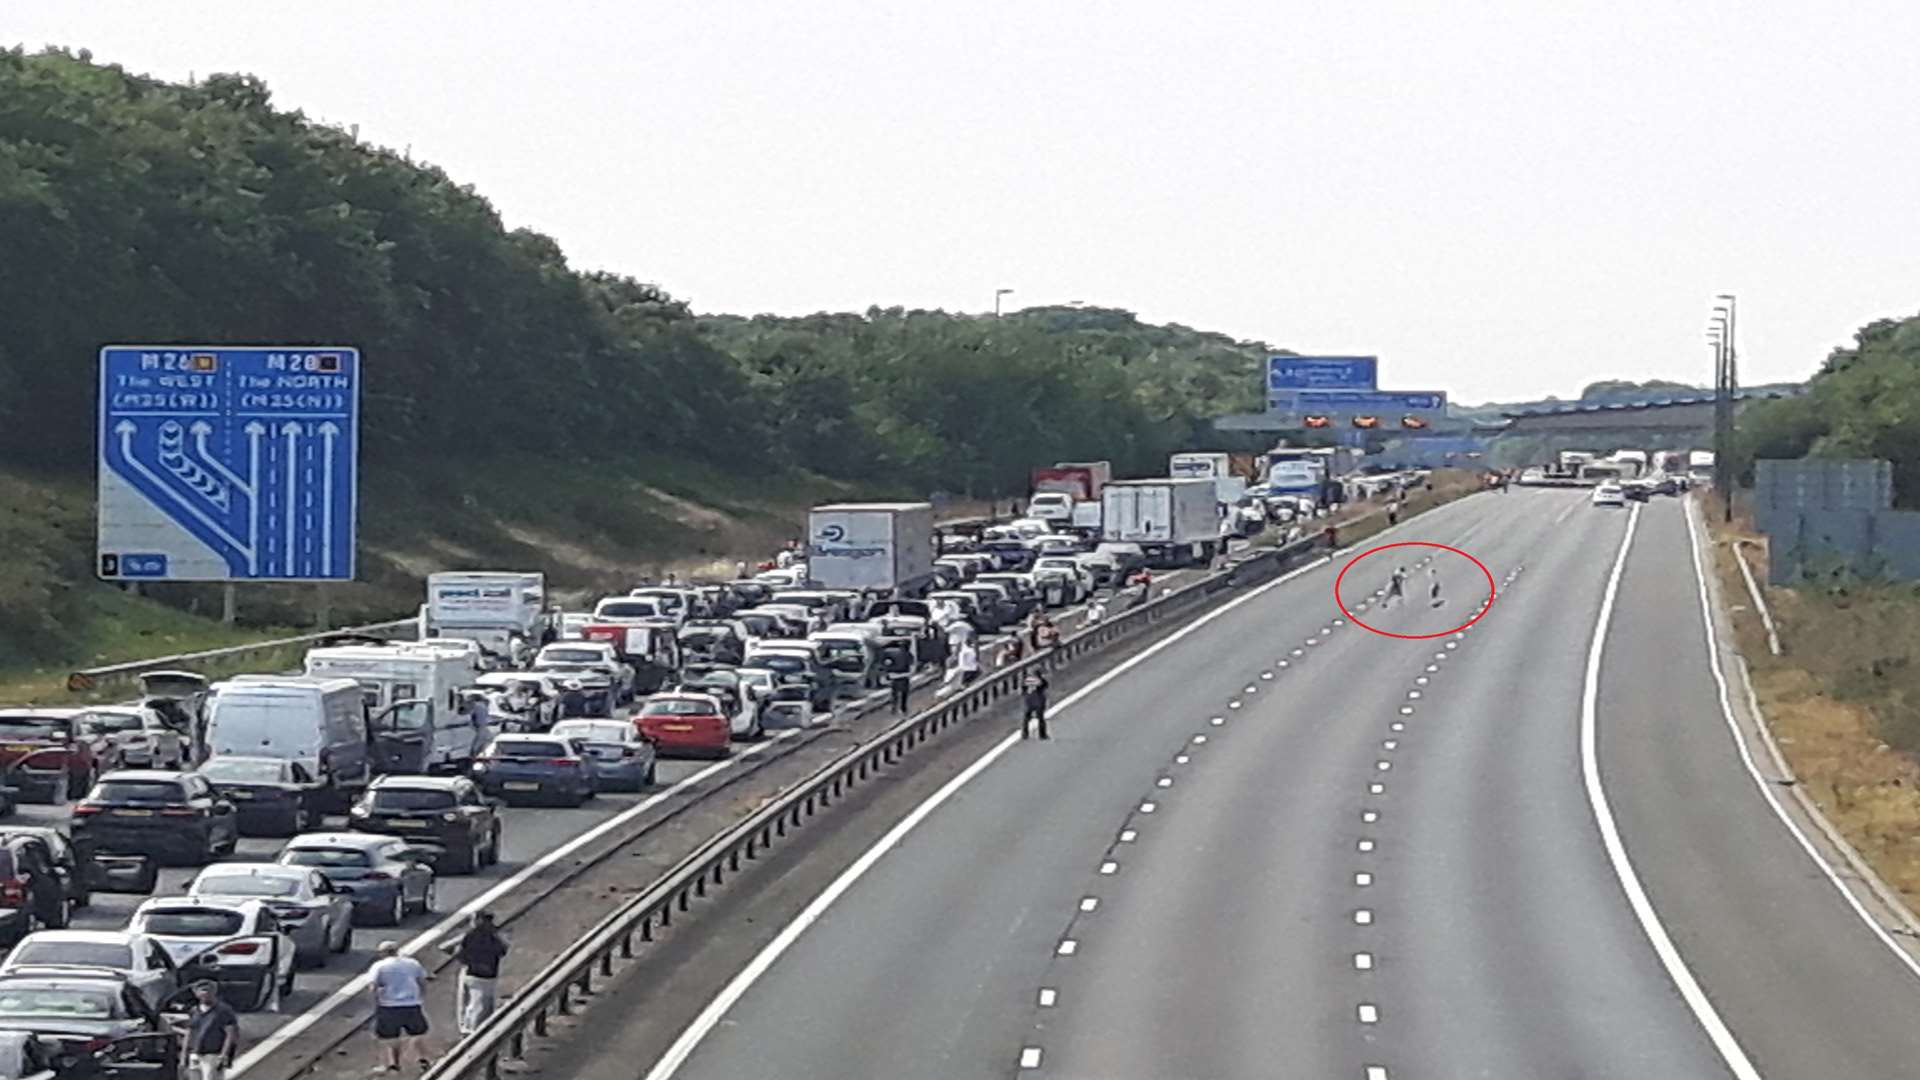 People play football on the closed M20 - again